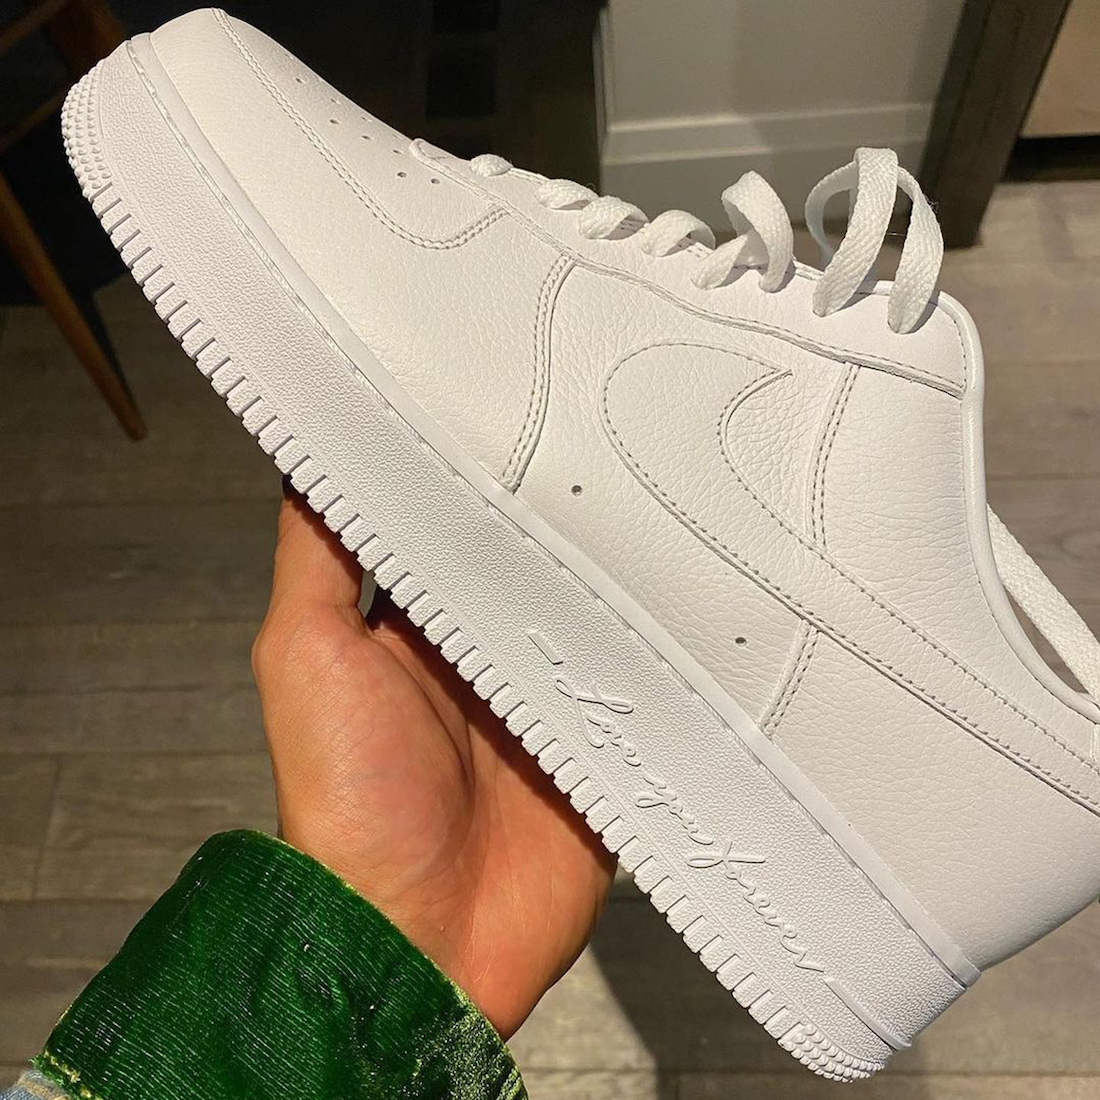 Drake x Nike Air Force 1 Low Certified Lover Boy Release Date - SBD